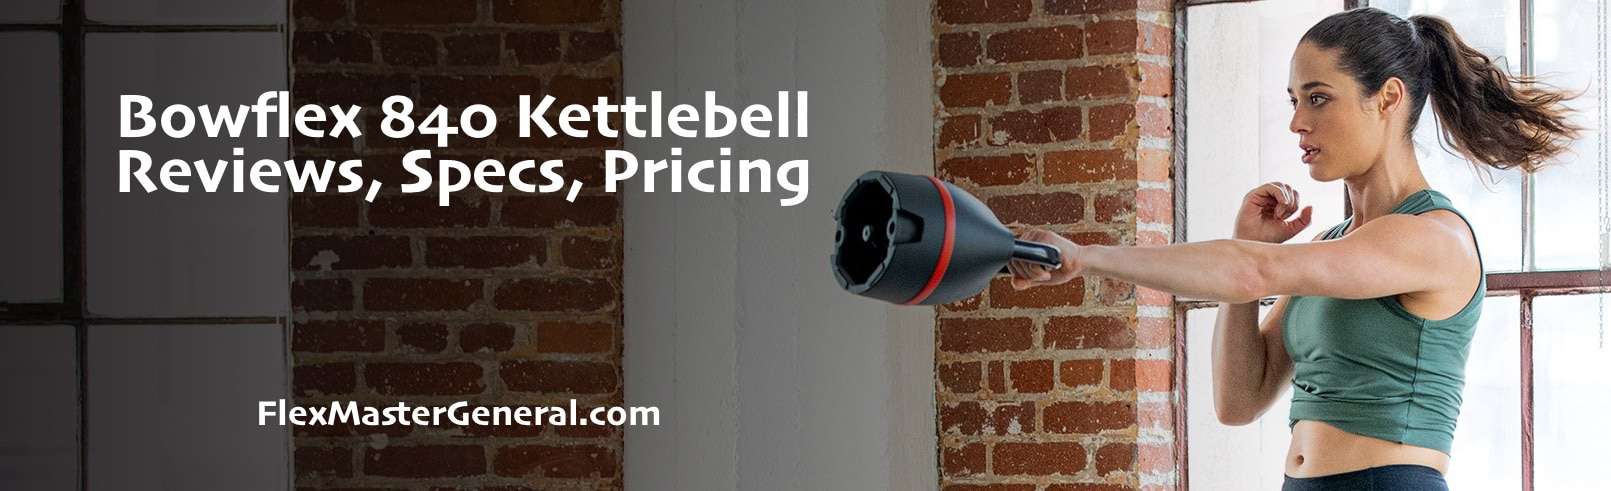 Bowflex Kettlebell Review: Price + Where to Buy